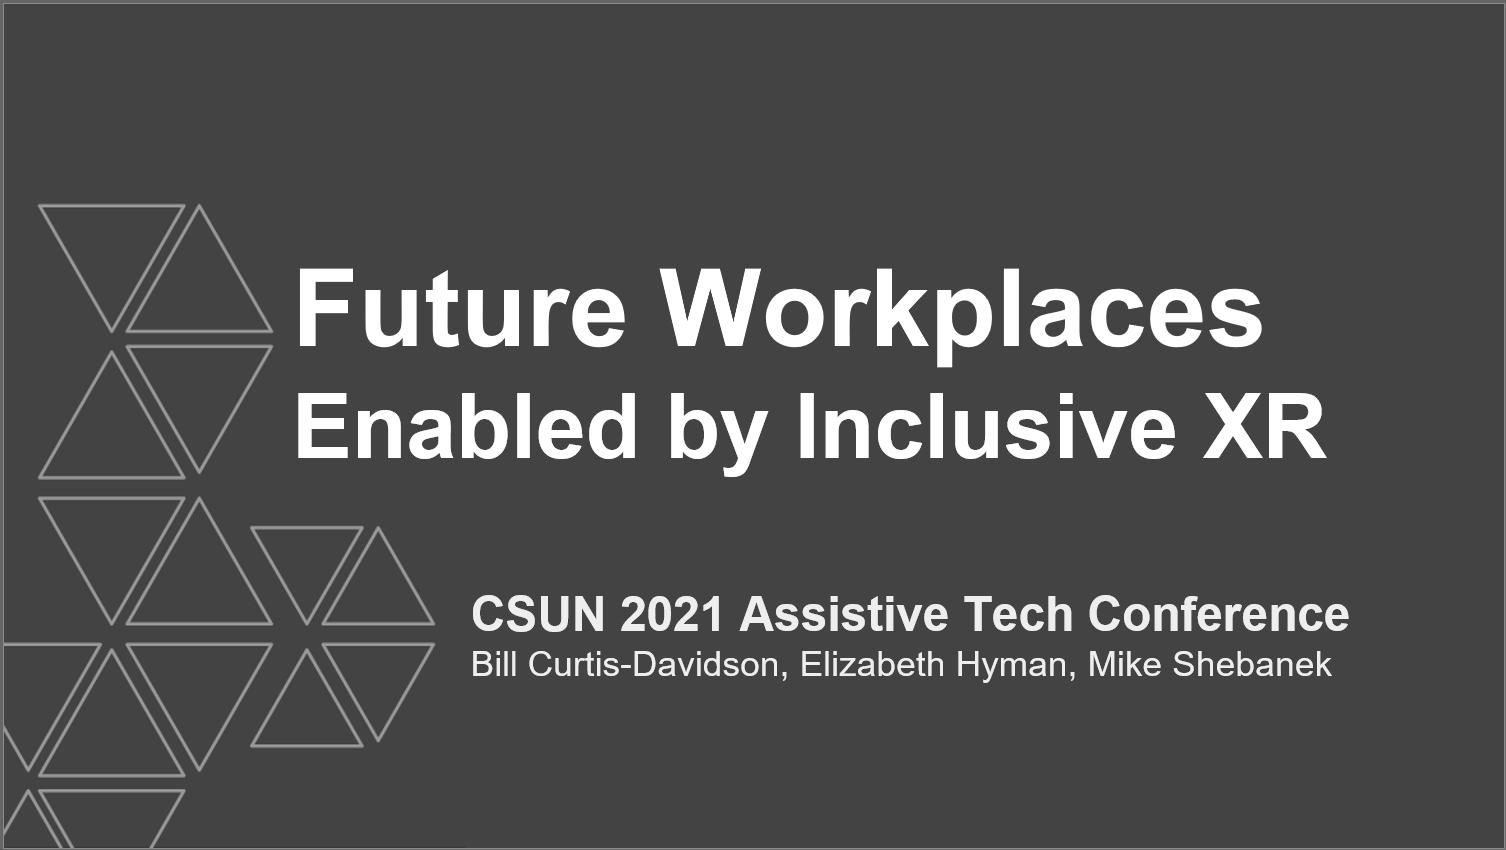 XRA PRESENTS ON FUTURE WORKPLACES AT CSUN CONFERENCE